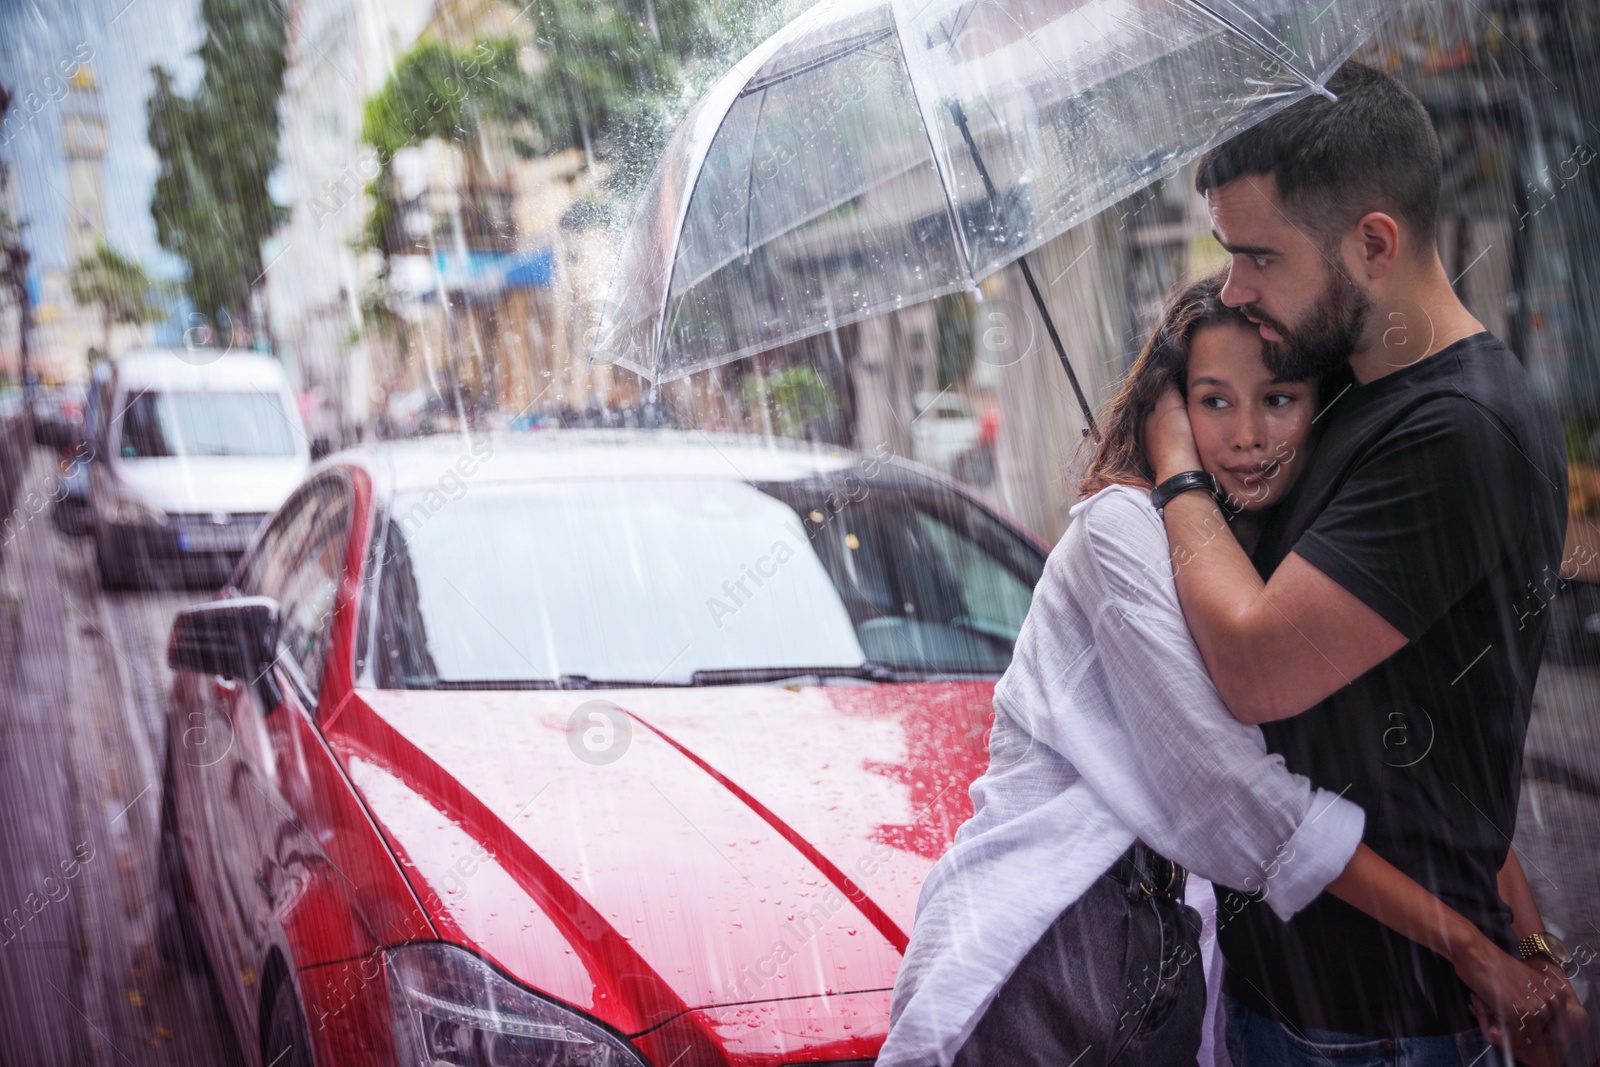 Image of Young couple with umbrella enjoying time together under rain on city street